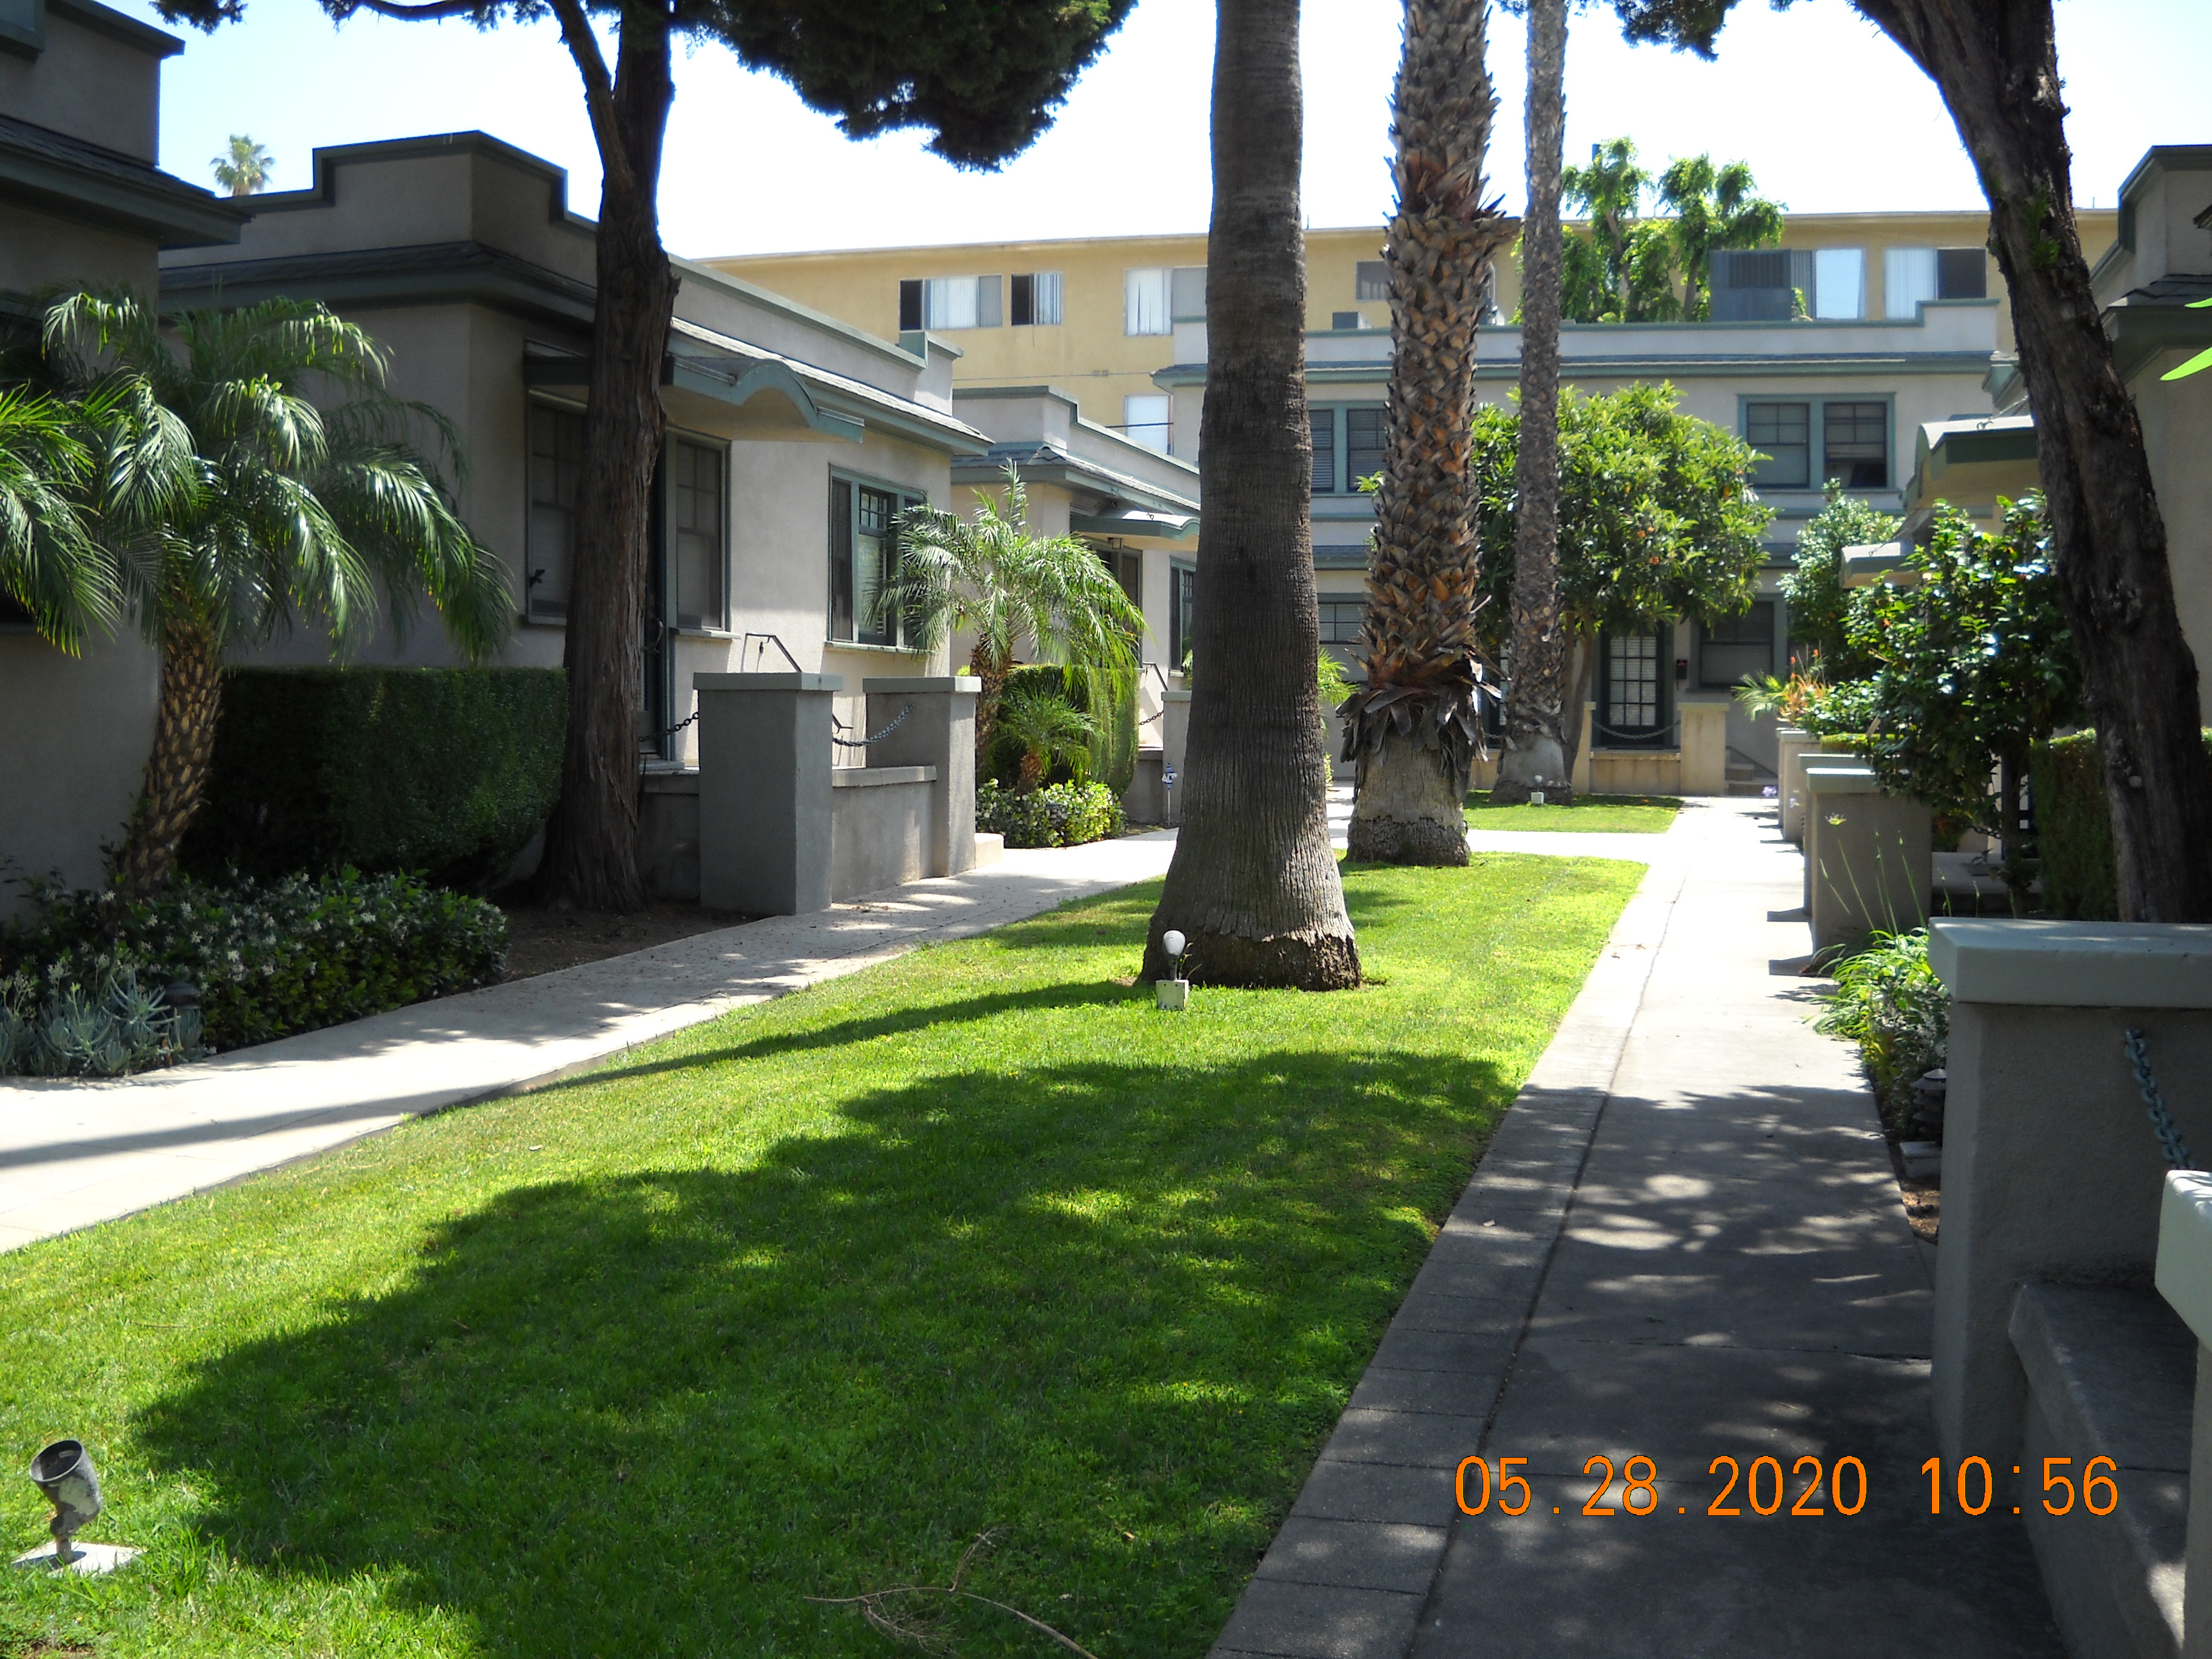 Courtyard with grass and palm tree area in the middle. On the sides are two passagewaysthat lead to units. Units are separated and are one story. Straight ahead, the unit in sight is two stories.